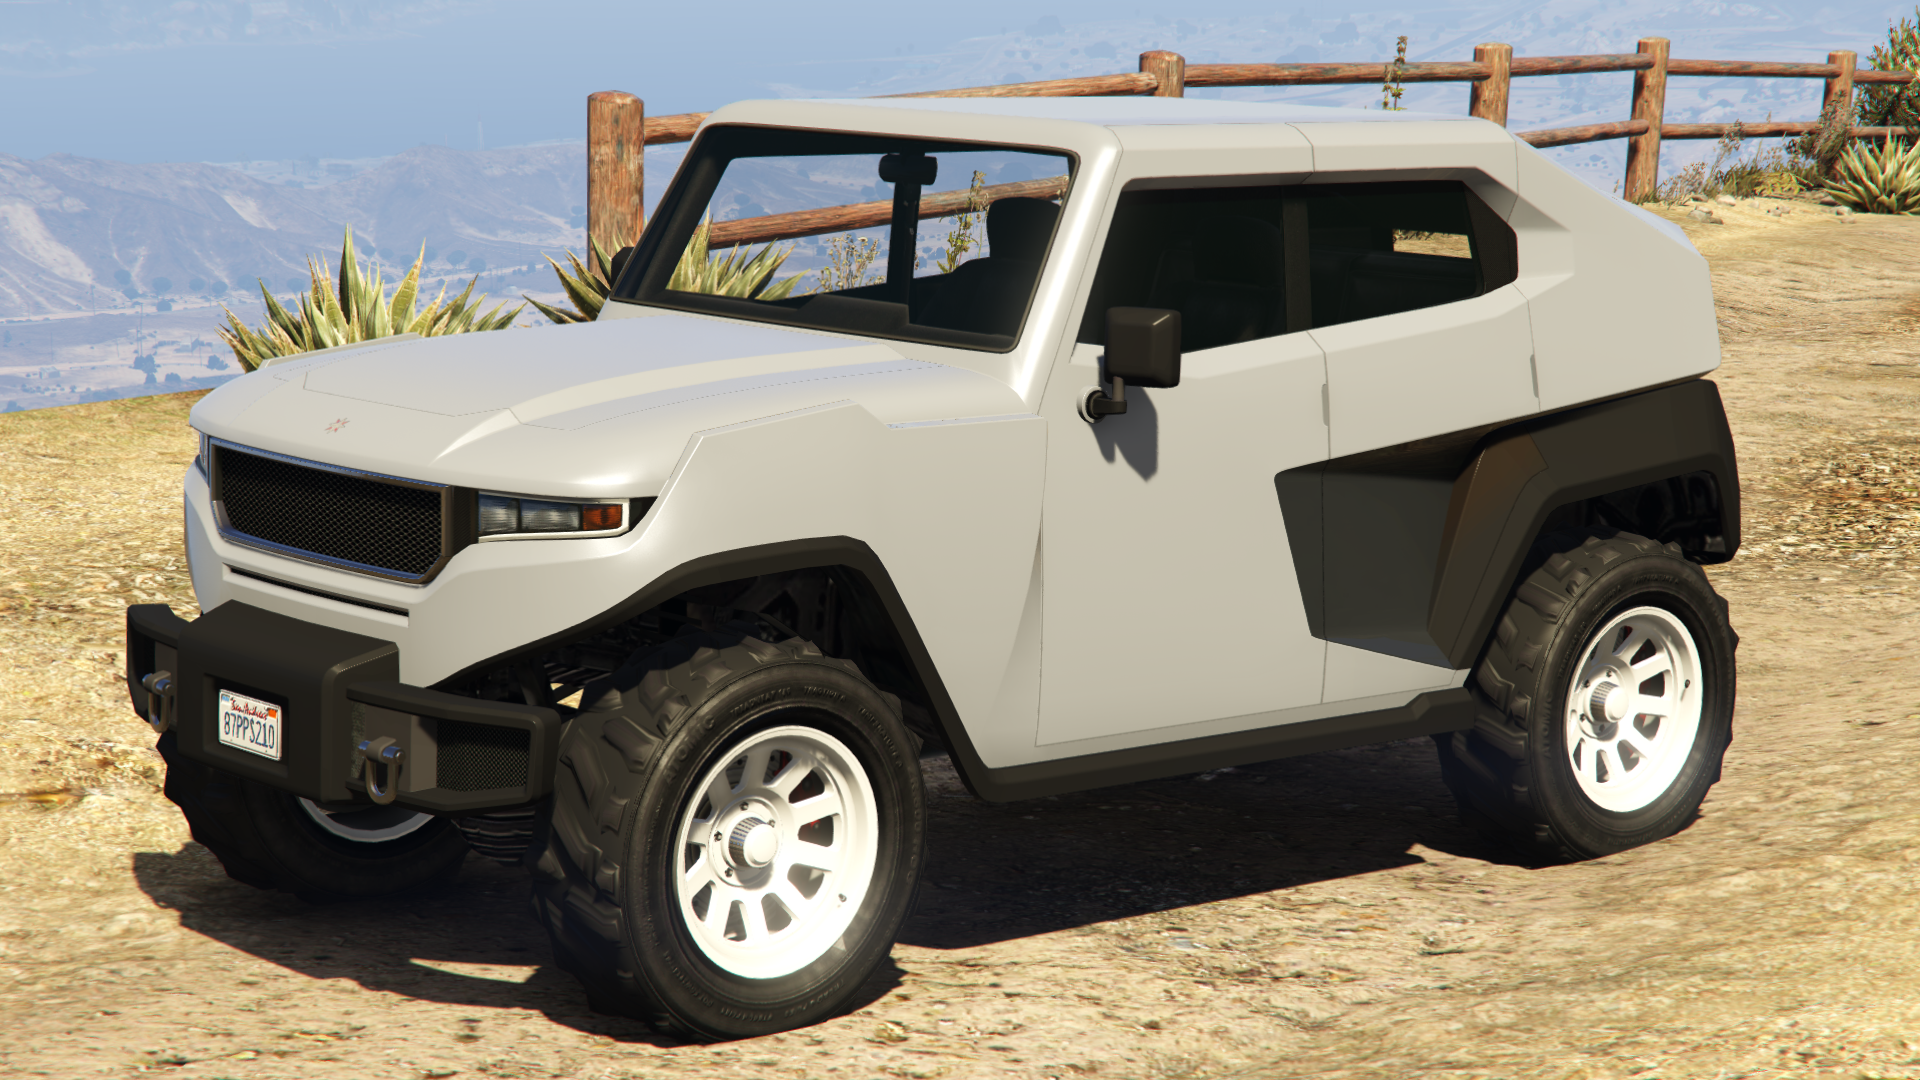 The Canis Freecrawler is an off-road SUV featured in Grand Theft Auto Onlin...